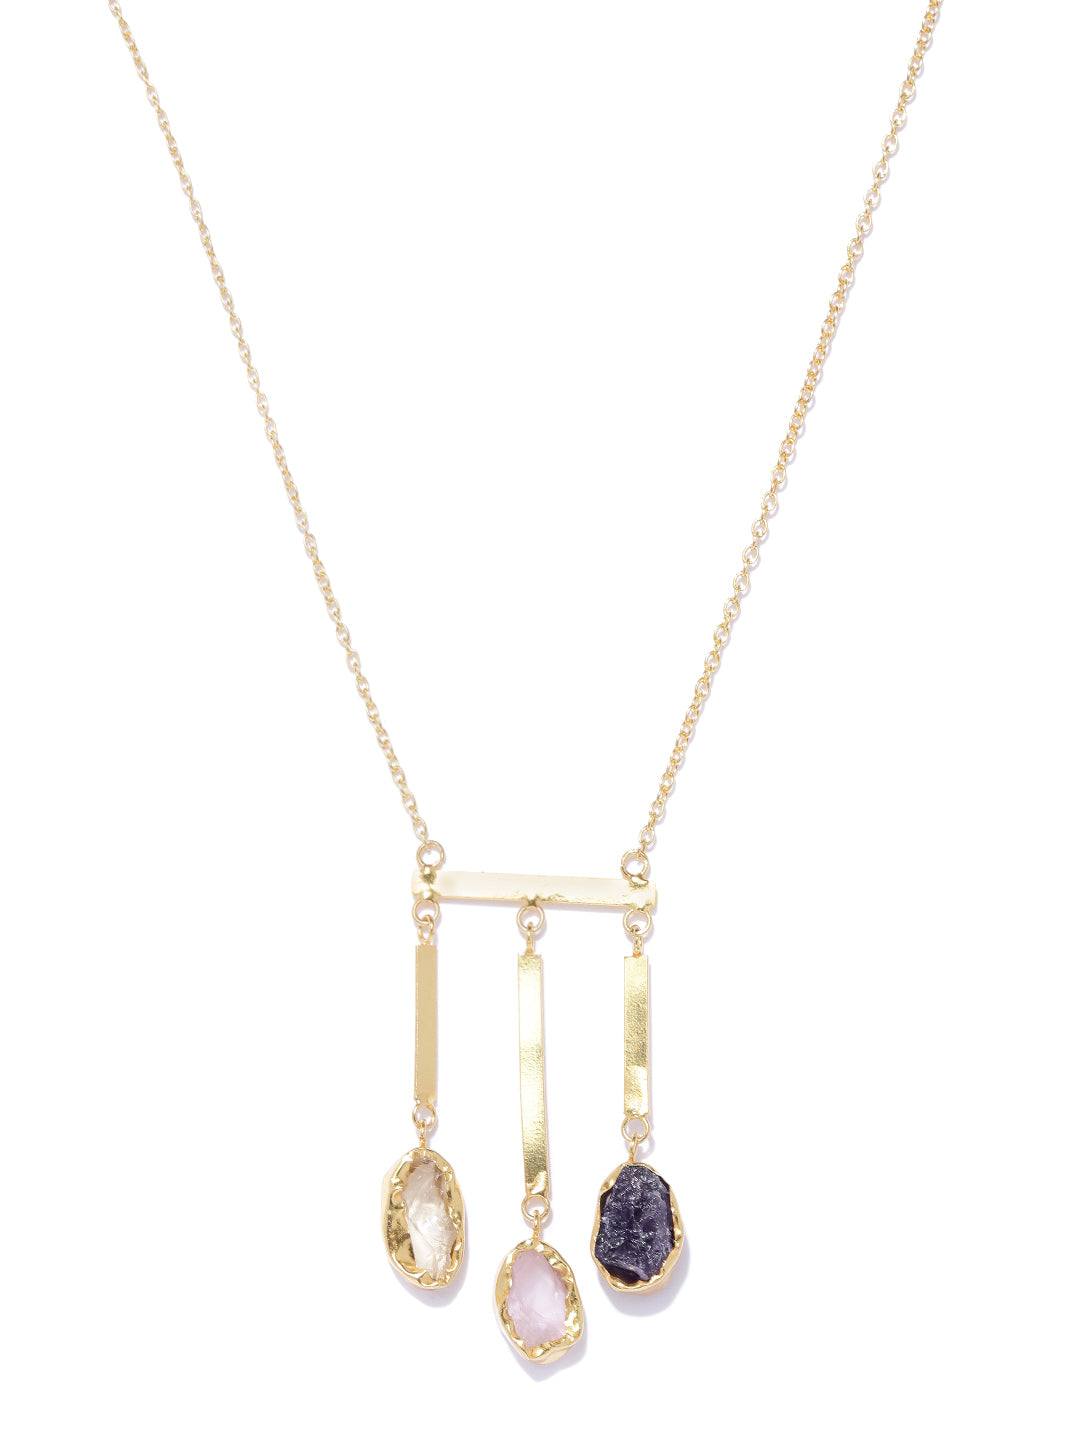 Blueberry gold plated agate stone detailing necklace